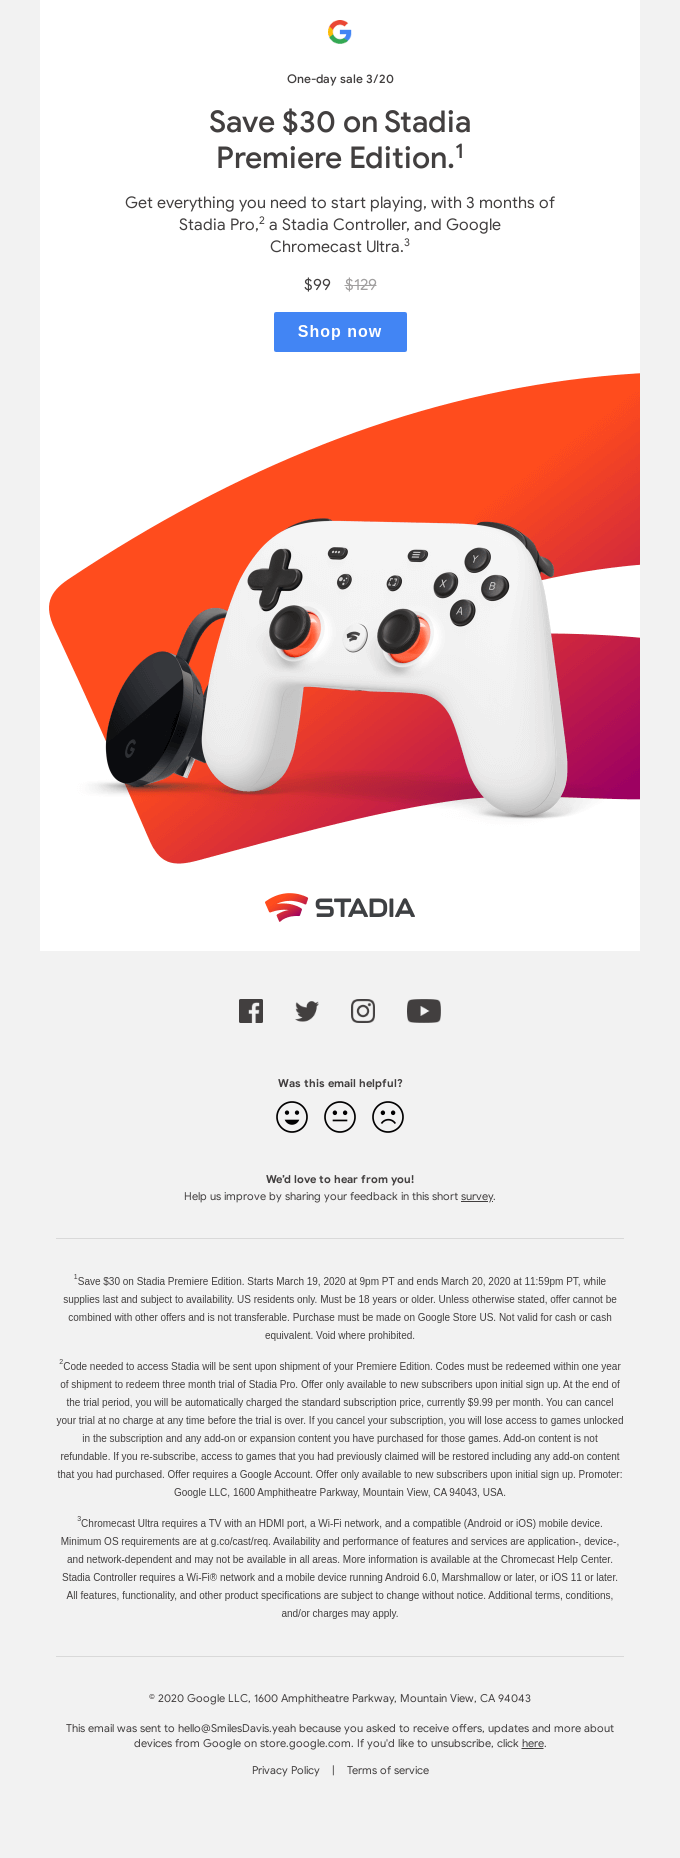 Today only: Save on Stadia Premiere Edition